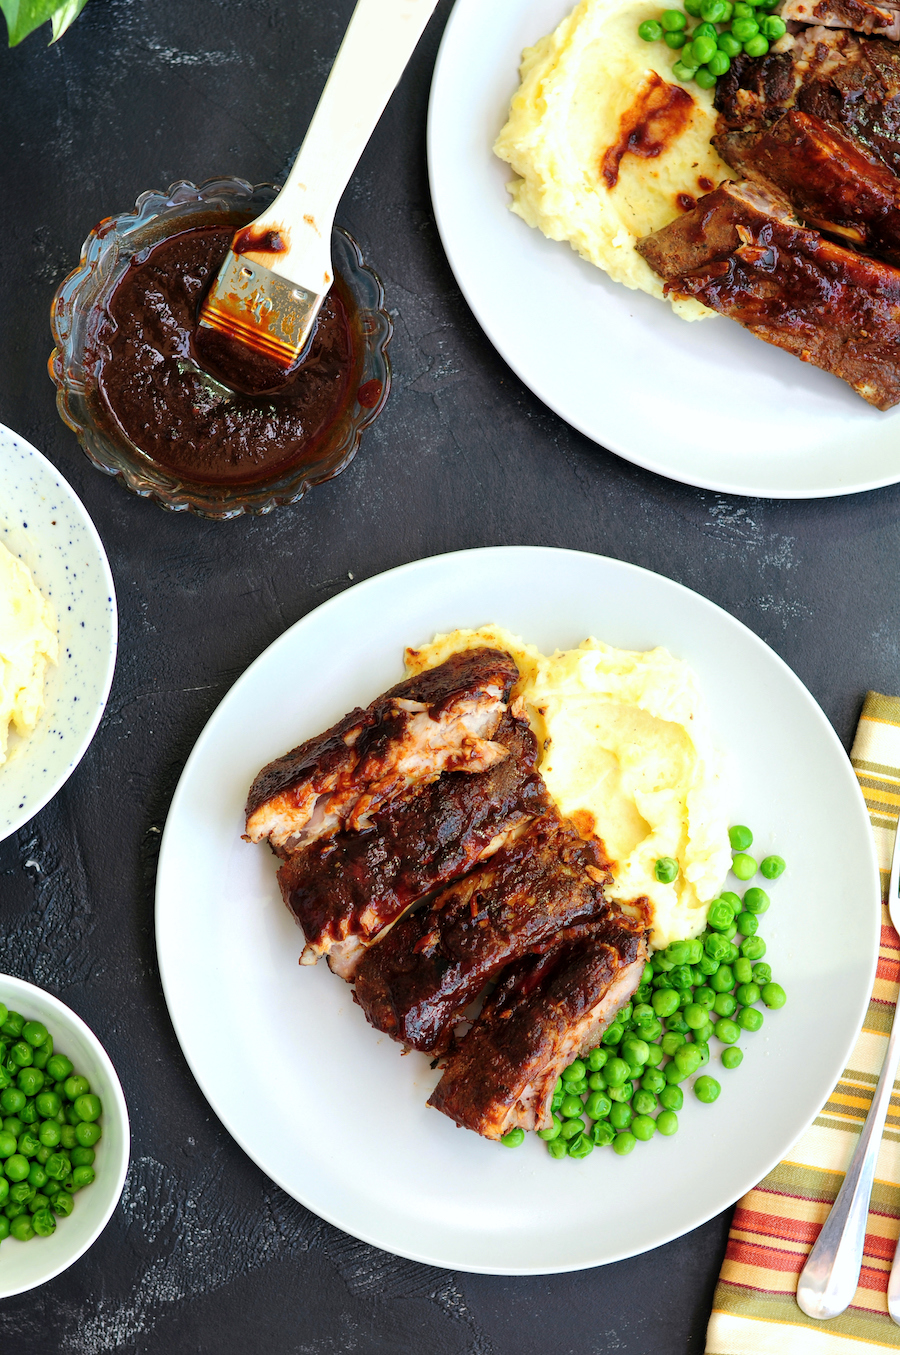 BBQ Baby Back Ribs with Mashed Potatoes and Green Peas